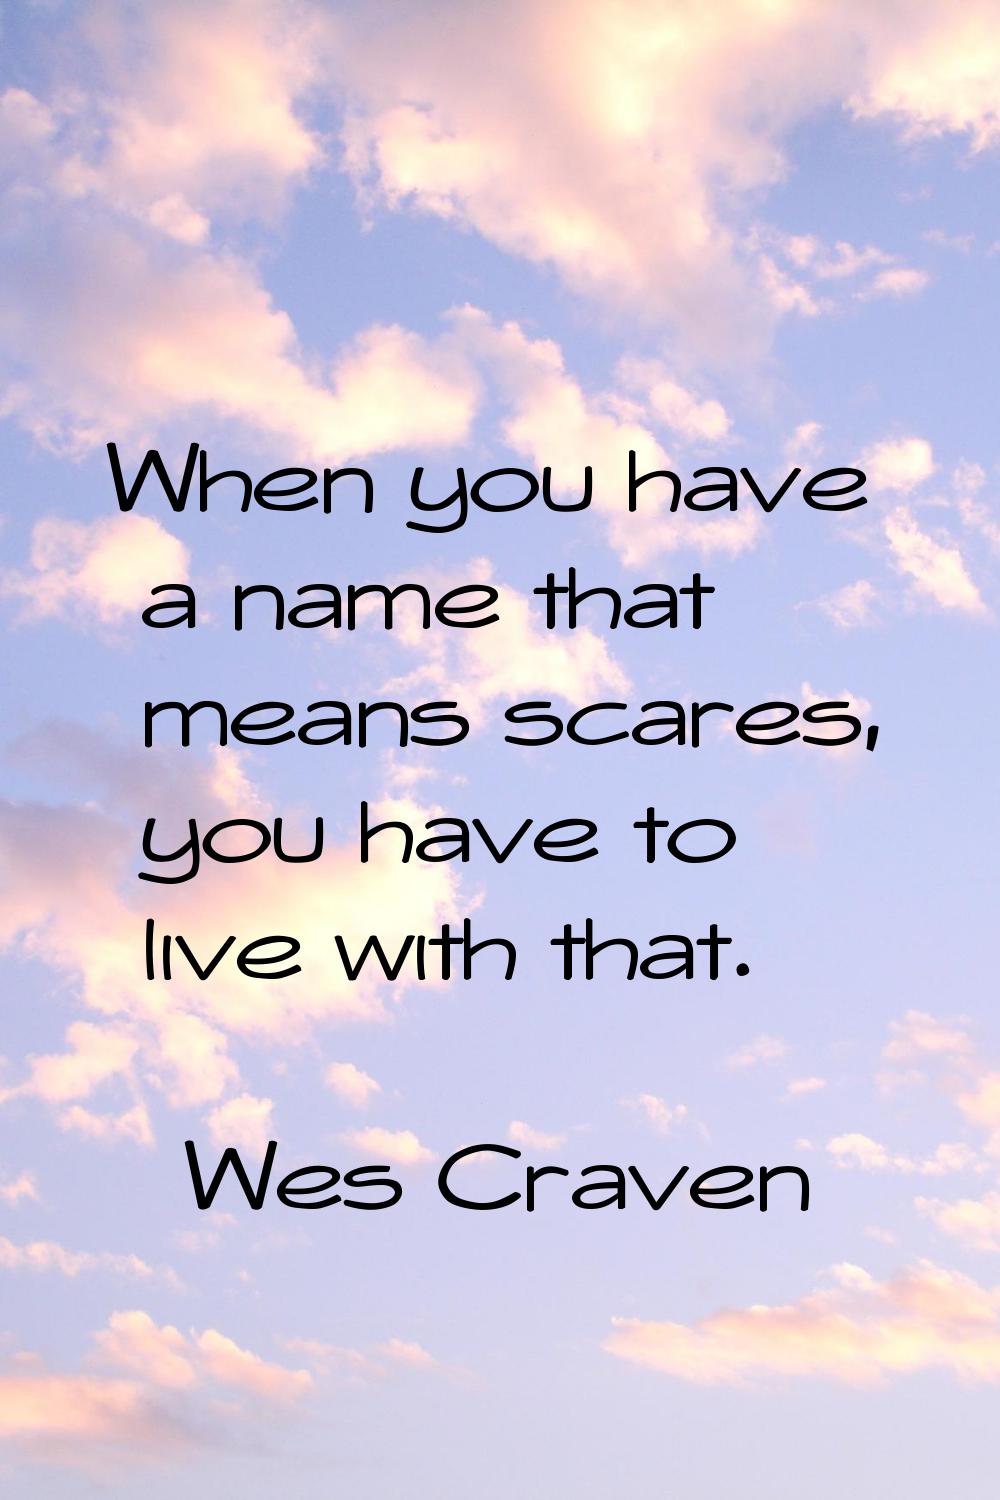 When you have a name that means scares, you have to live with that.